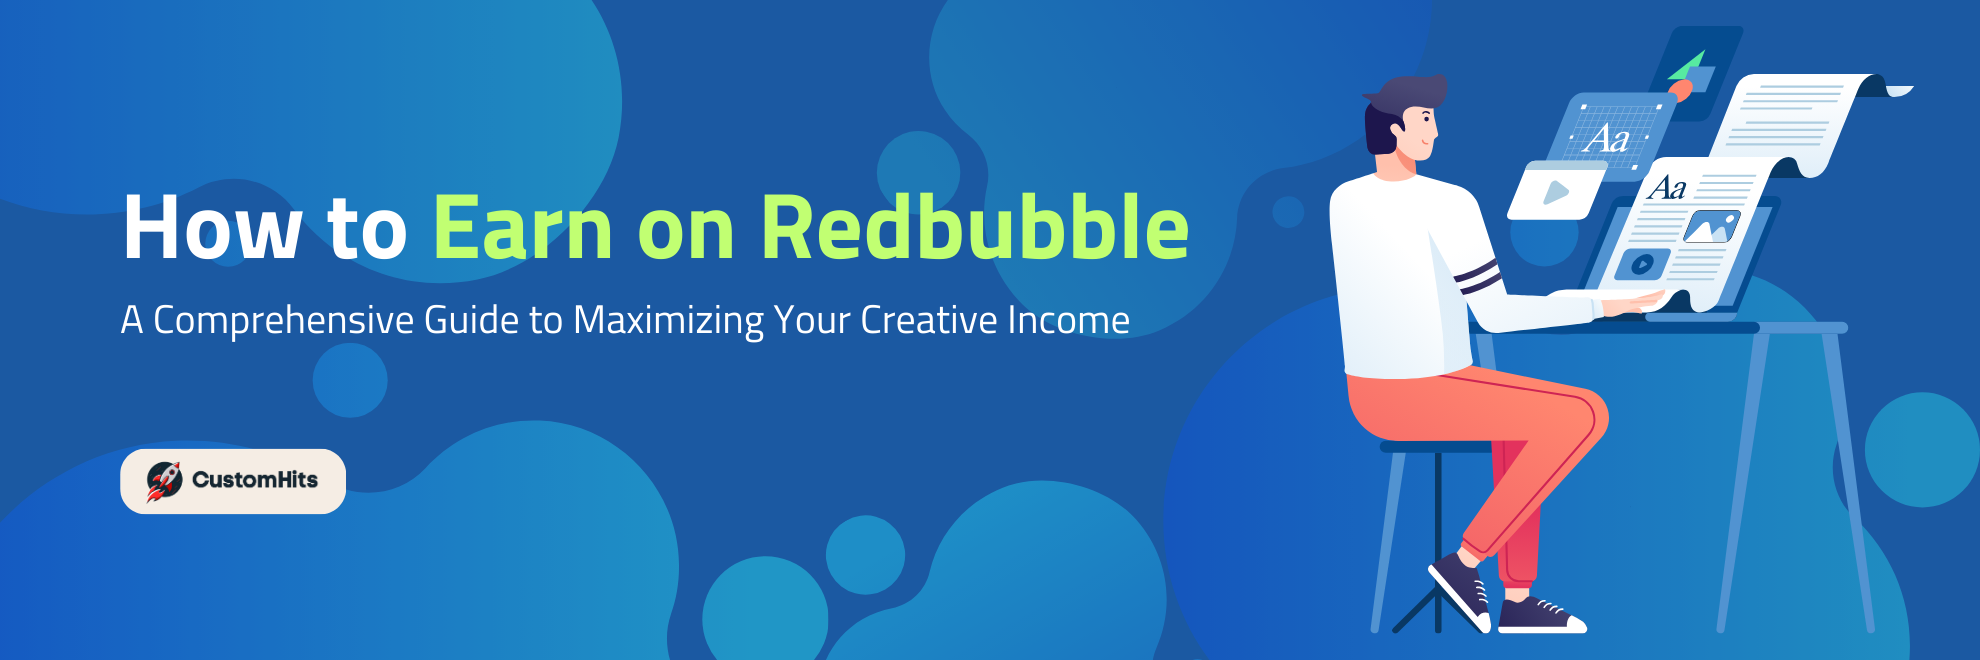 How to Earn on Redbubble: A Comprehensive Guide to Maximizing Your Creative Income